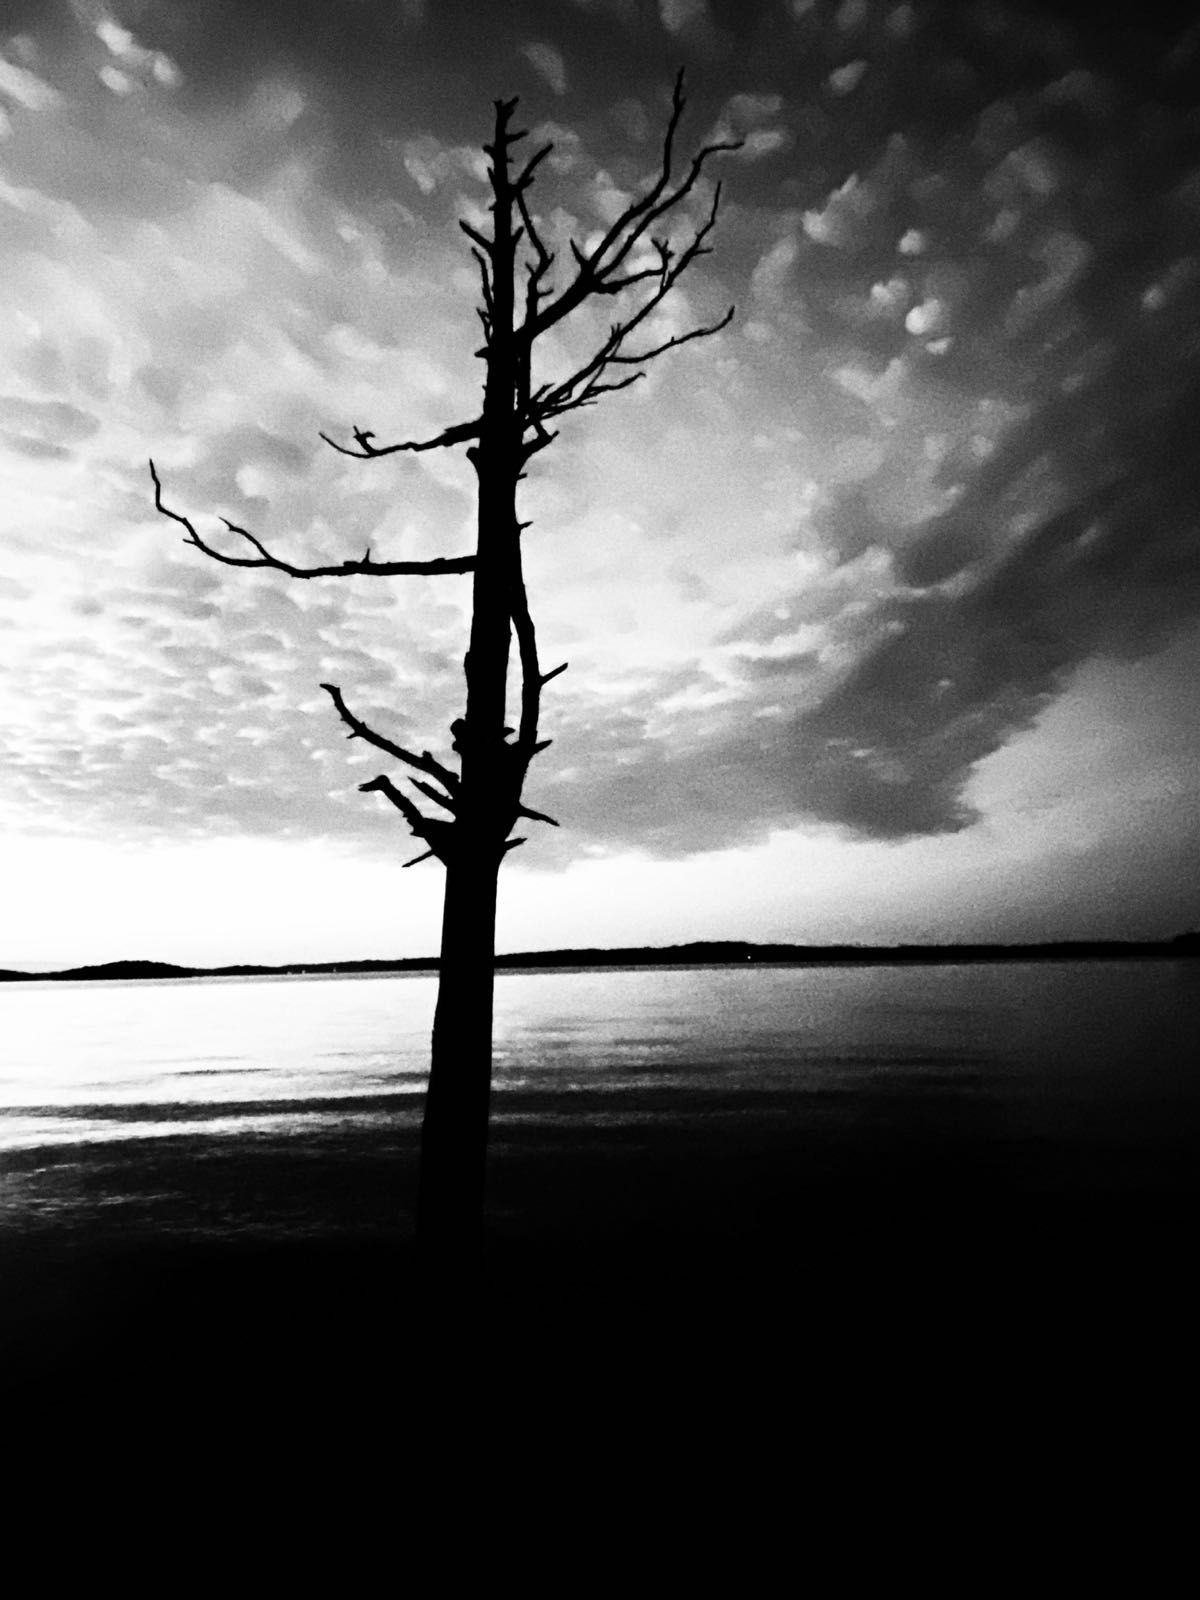 Silhouette over Percy Priest lake near Nashville, Tennessee.